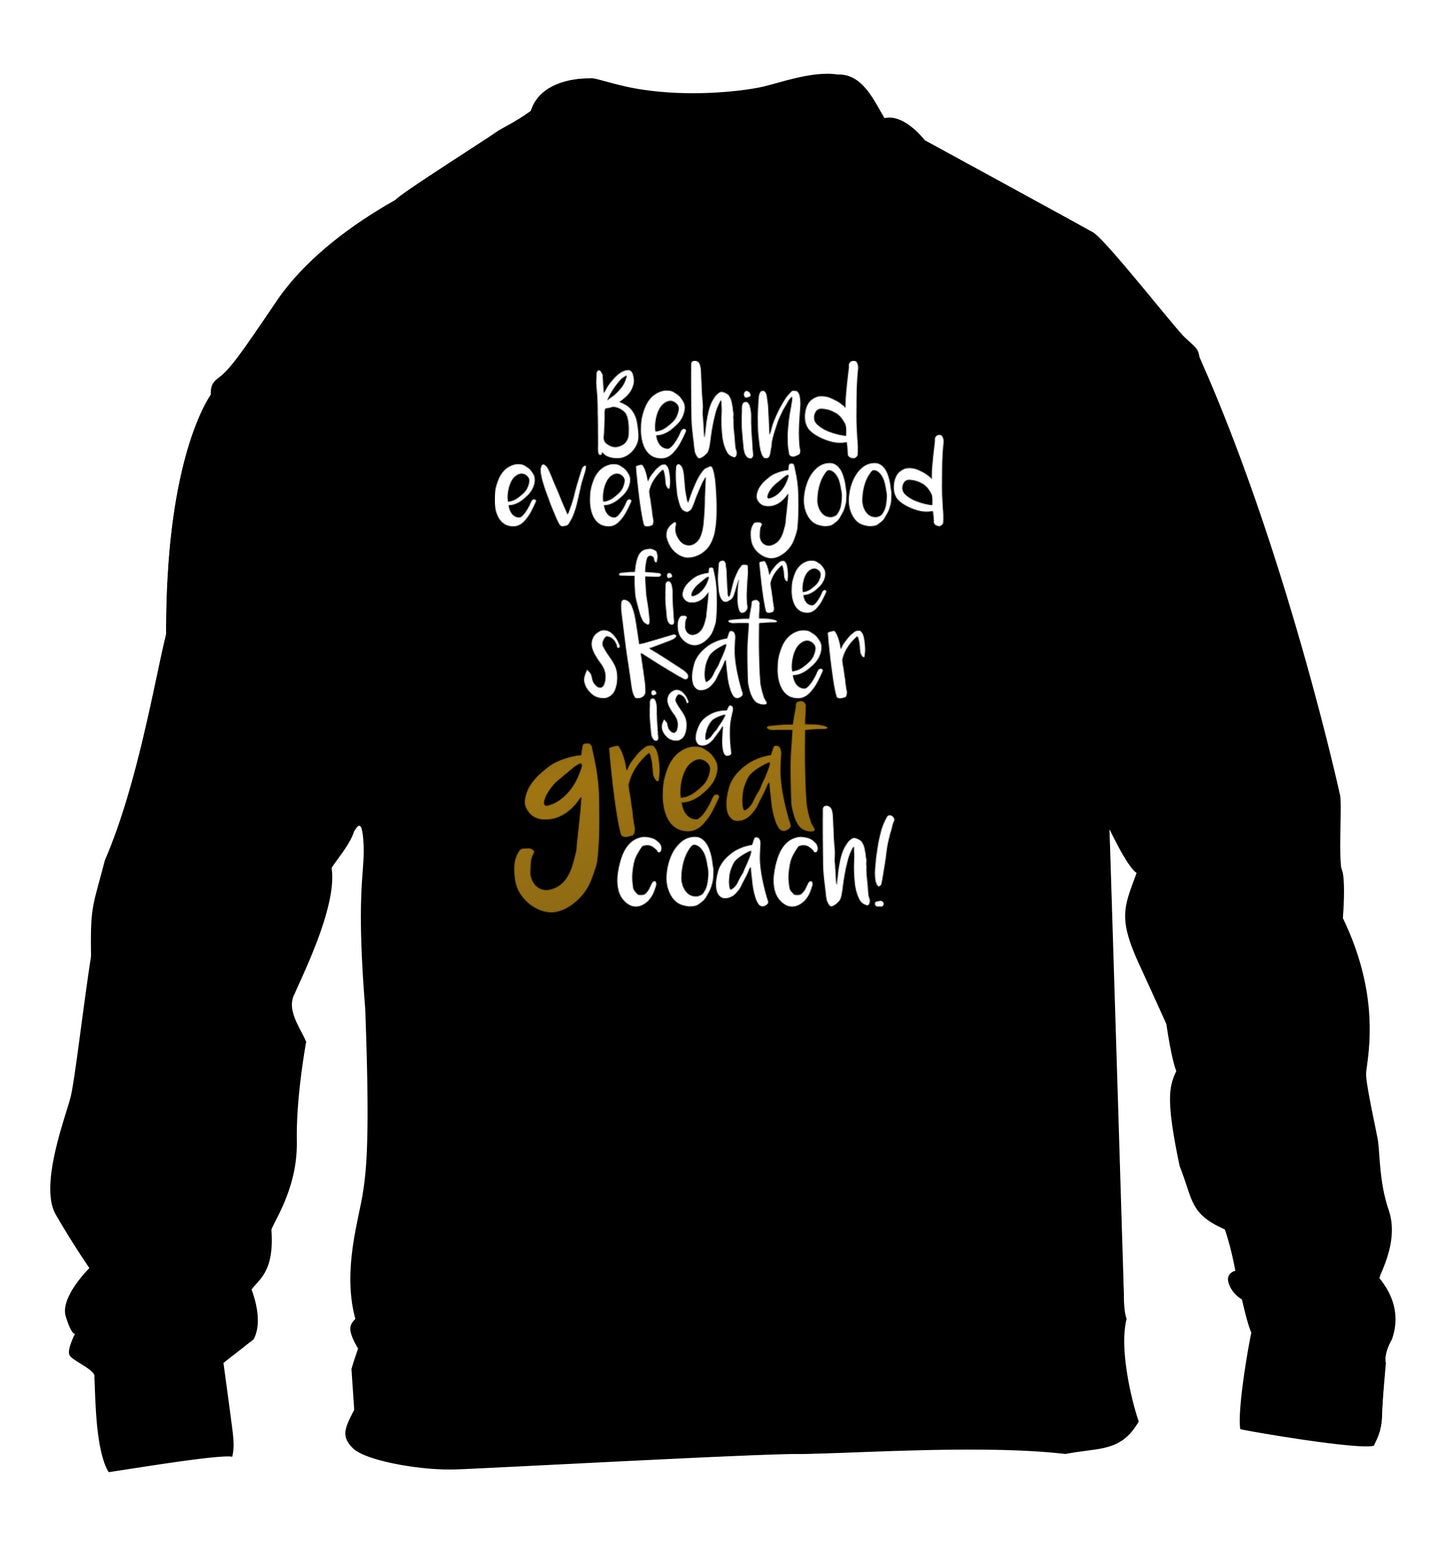 Behind every good figure skater is a great coach children's black sweater 12-14 Years